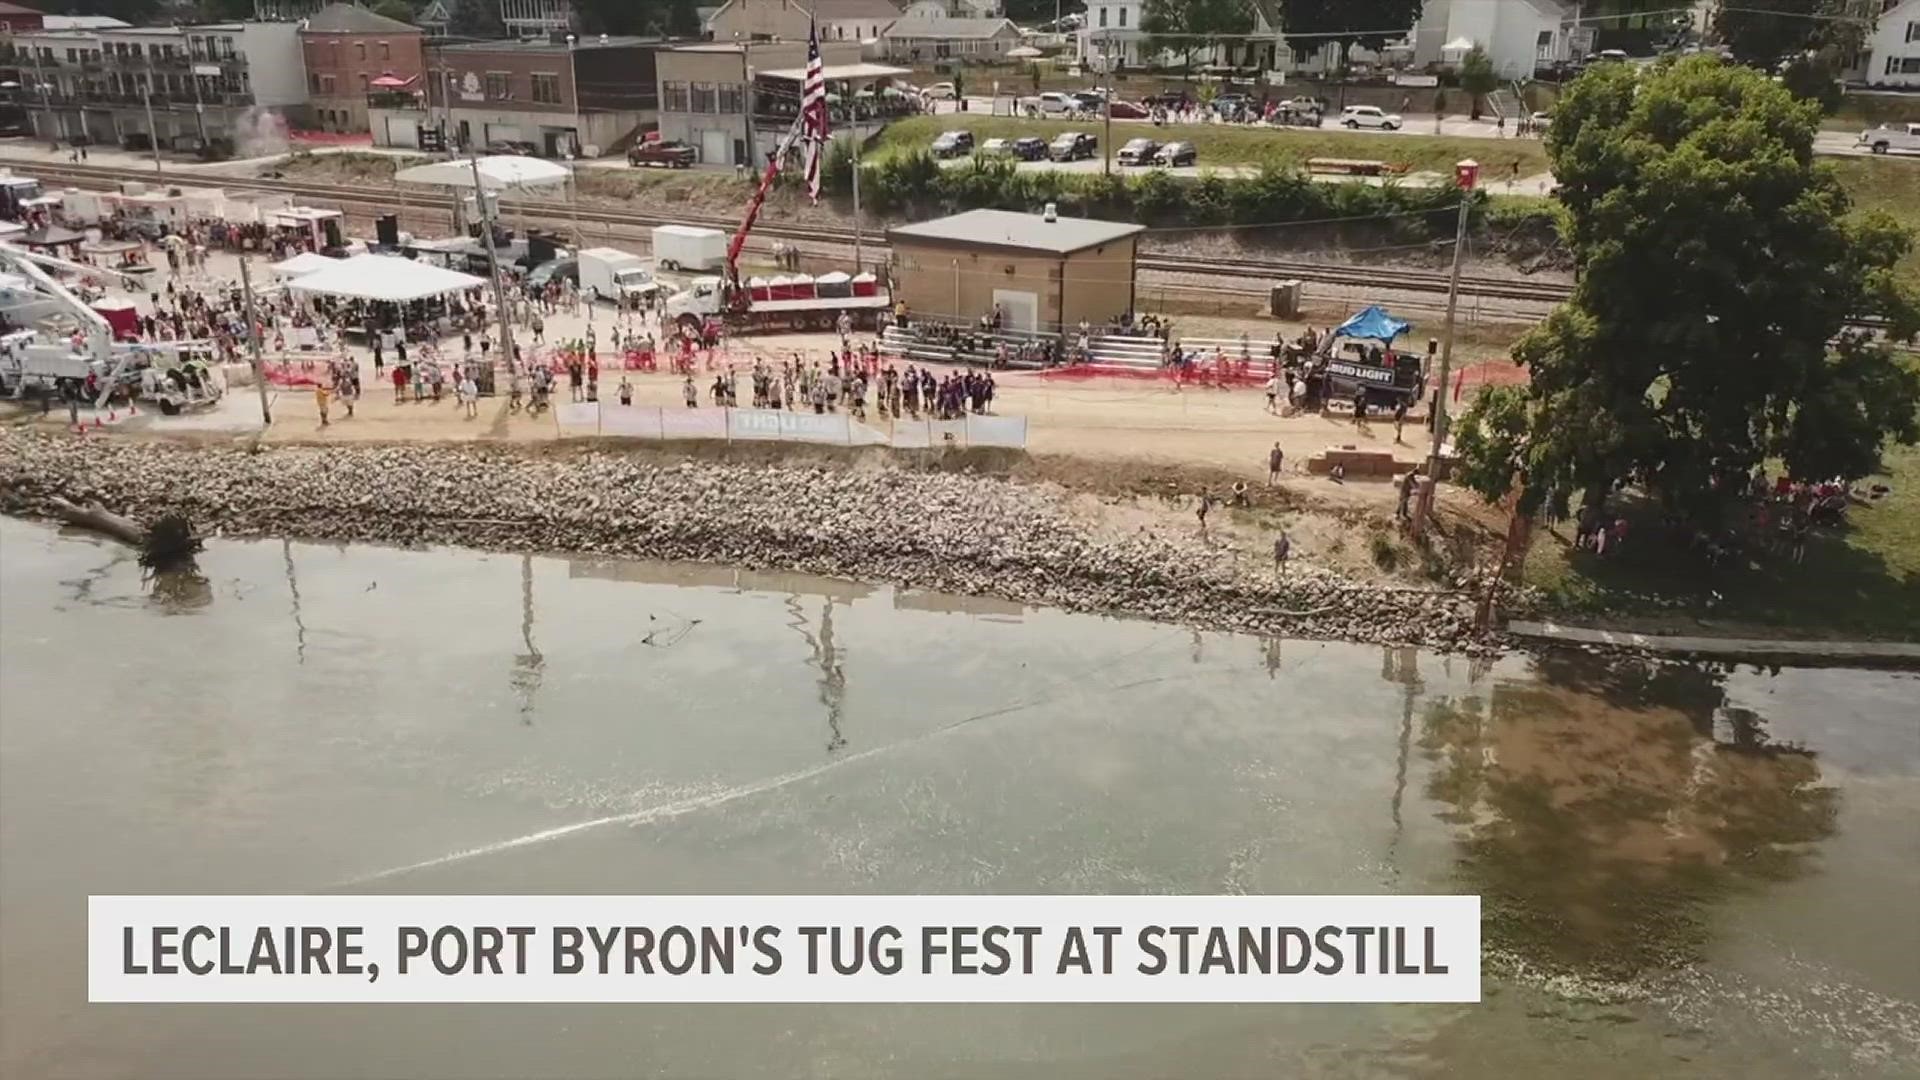 Negotiations between the Port Byron and LeClaire Tug Fest committees have stalled. Iowa reps say "vastly different currents" give the Illinois side an advantage.